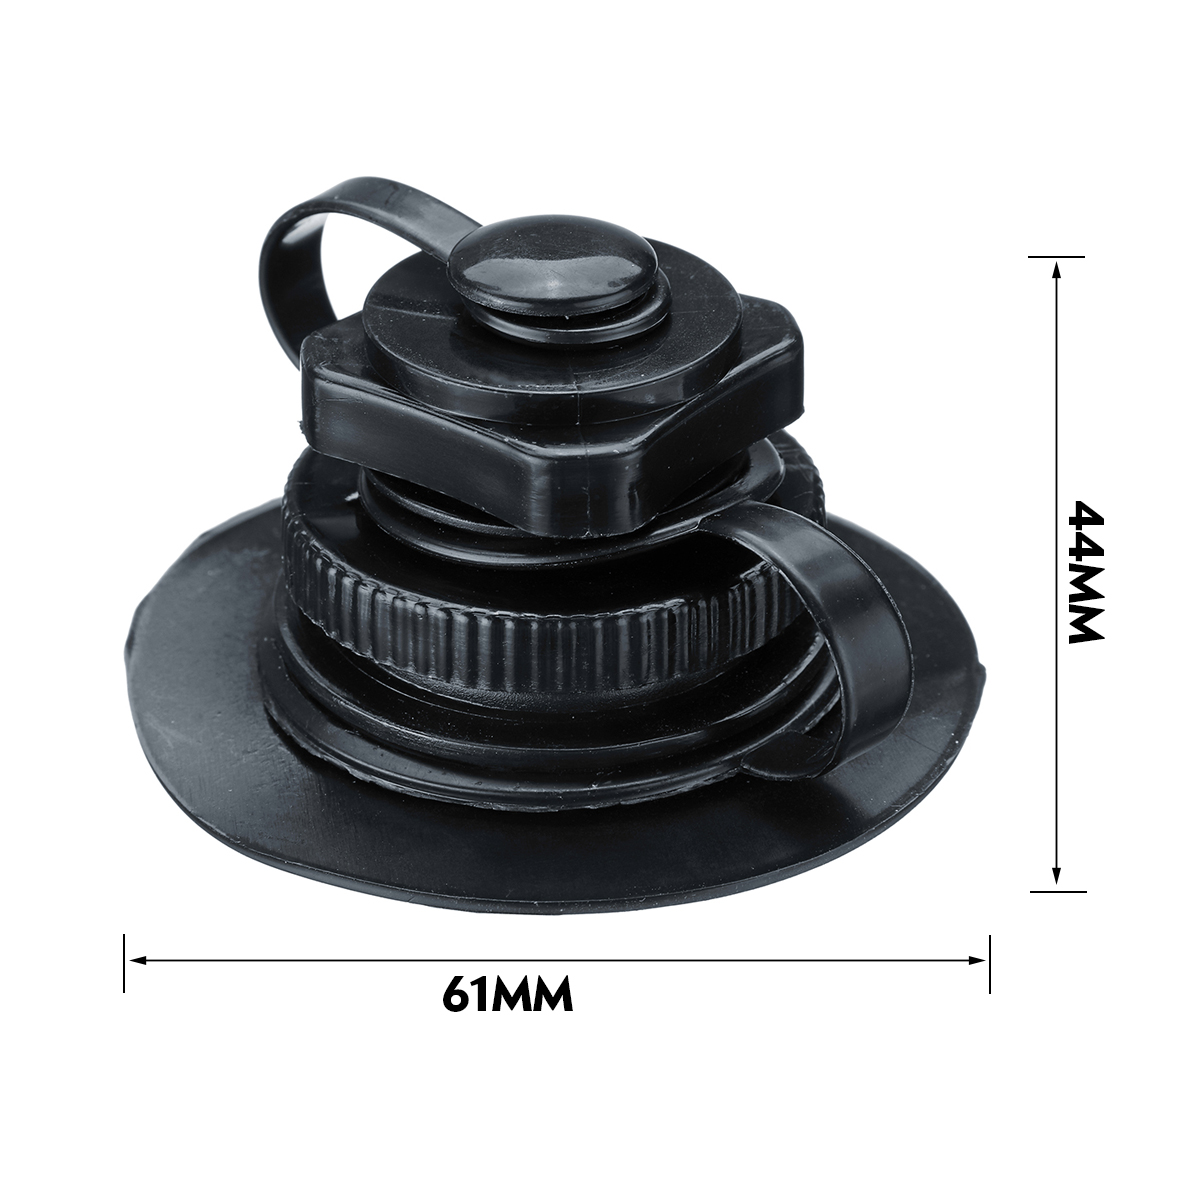 22mm-Inflatable-Spiral-Nozzle-Air-Inflation-Valve-Cap-For-Jacuzzi-Spa-Hot-Tub-1325969